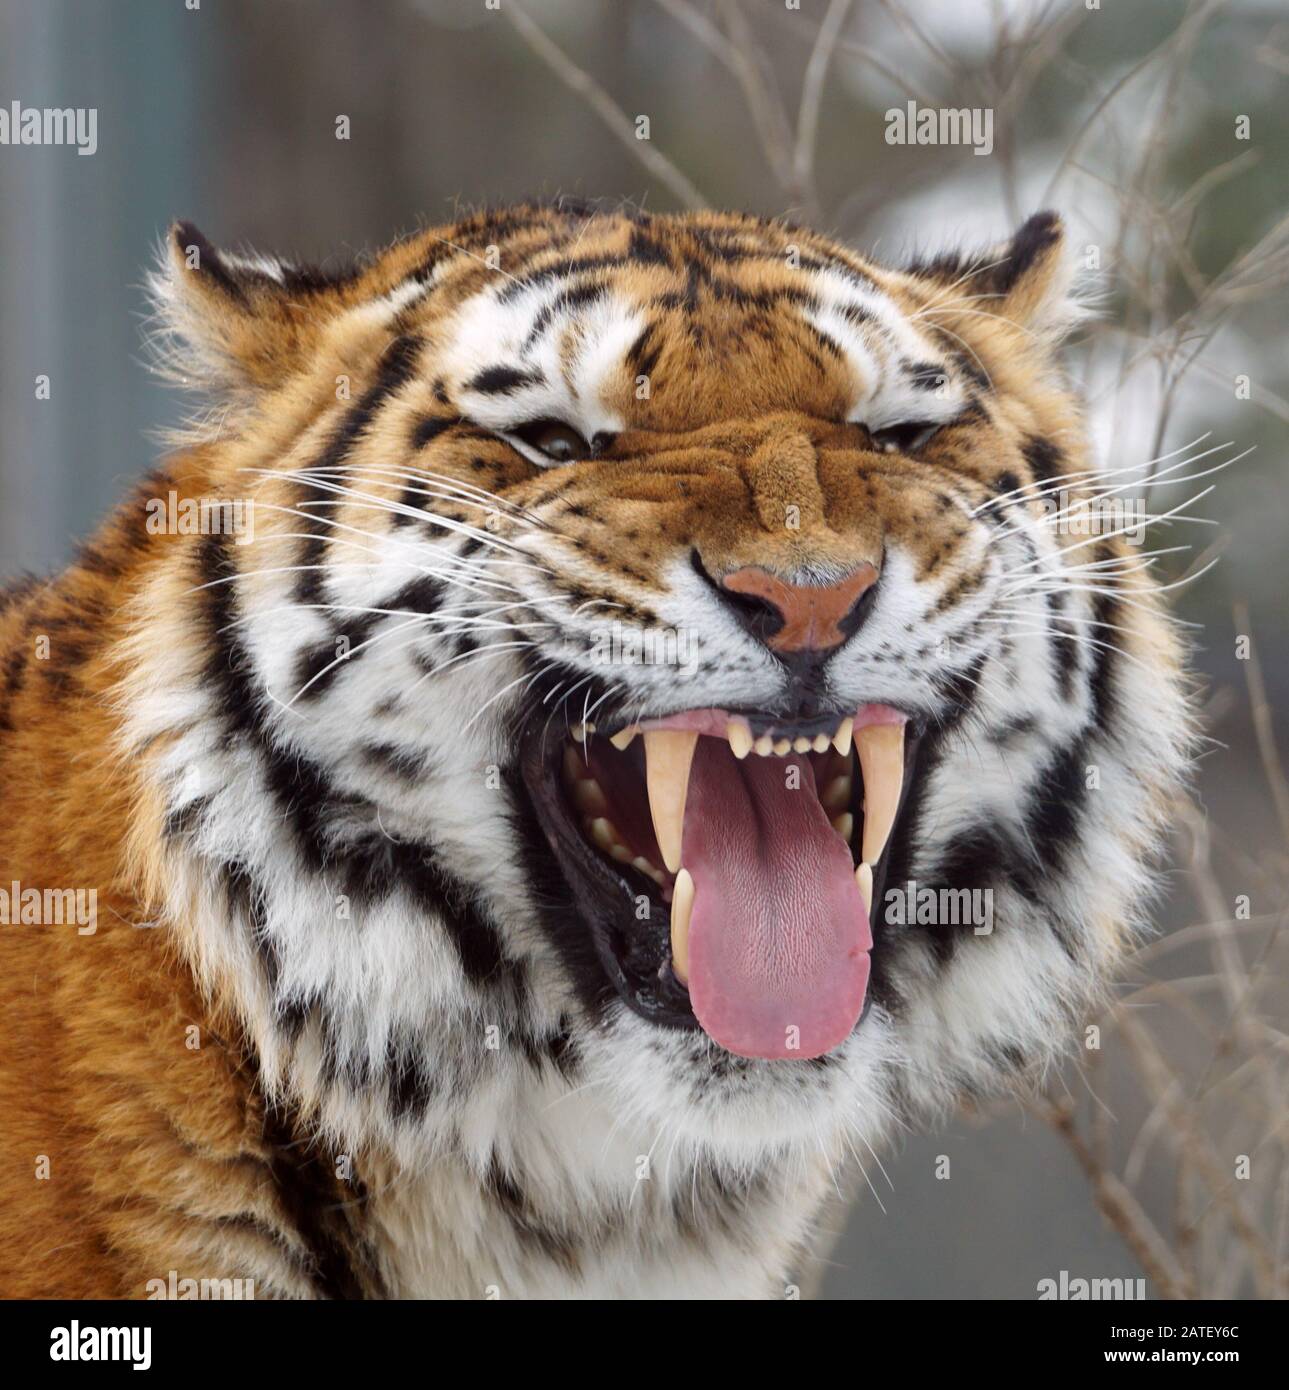 Extreme closeup  full frame  portrait of a tiger Stock Photo